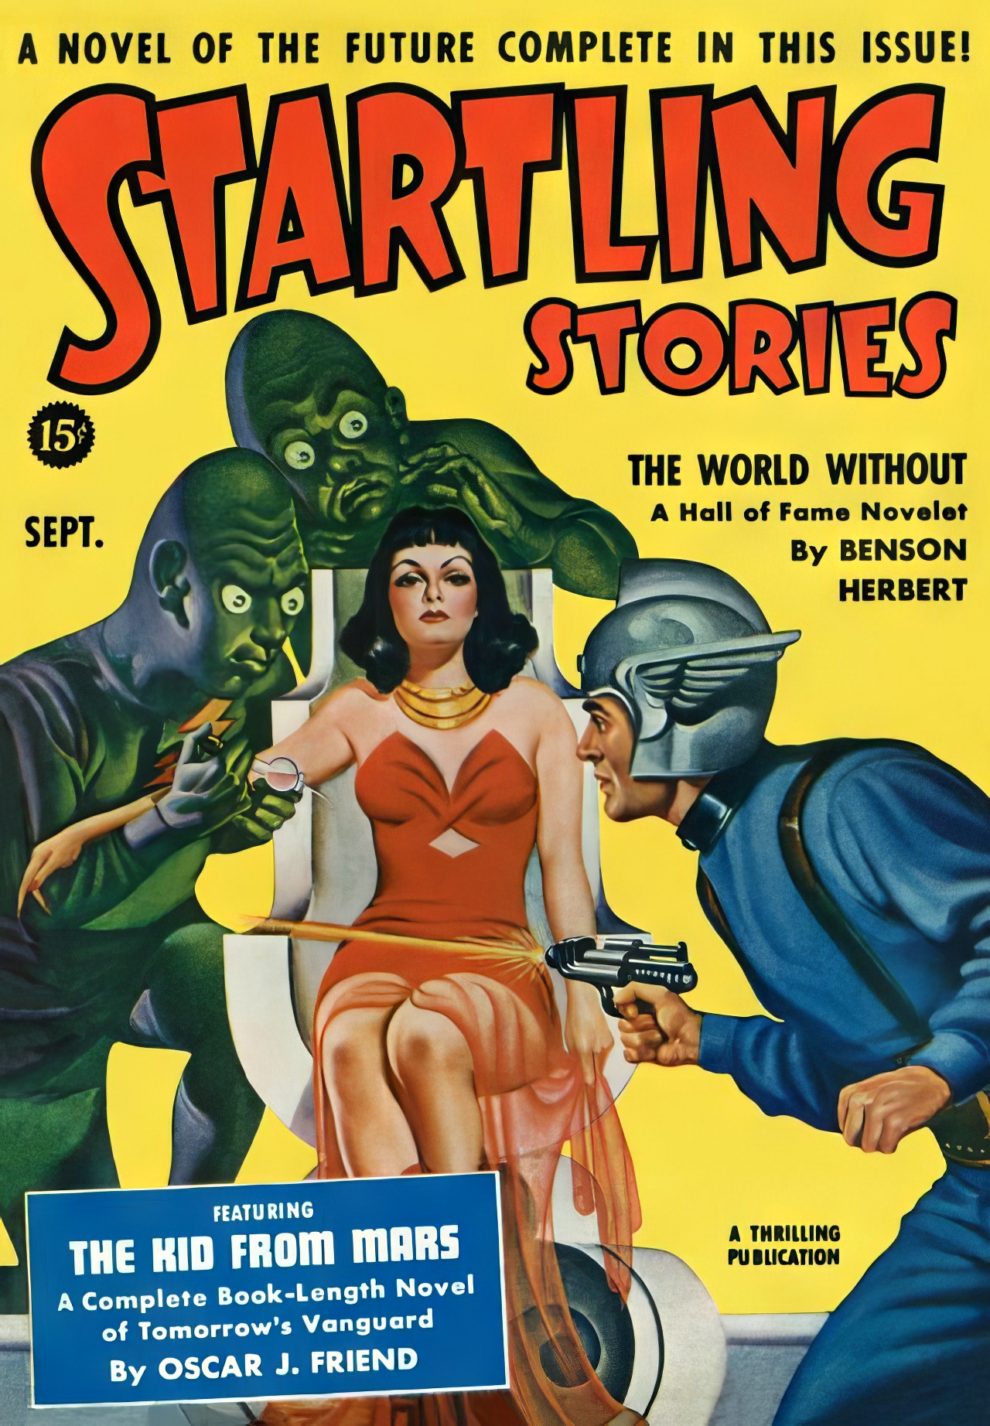 Startling Stories Covers 1940s 6 